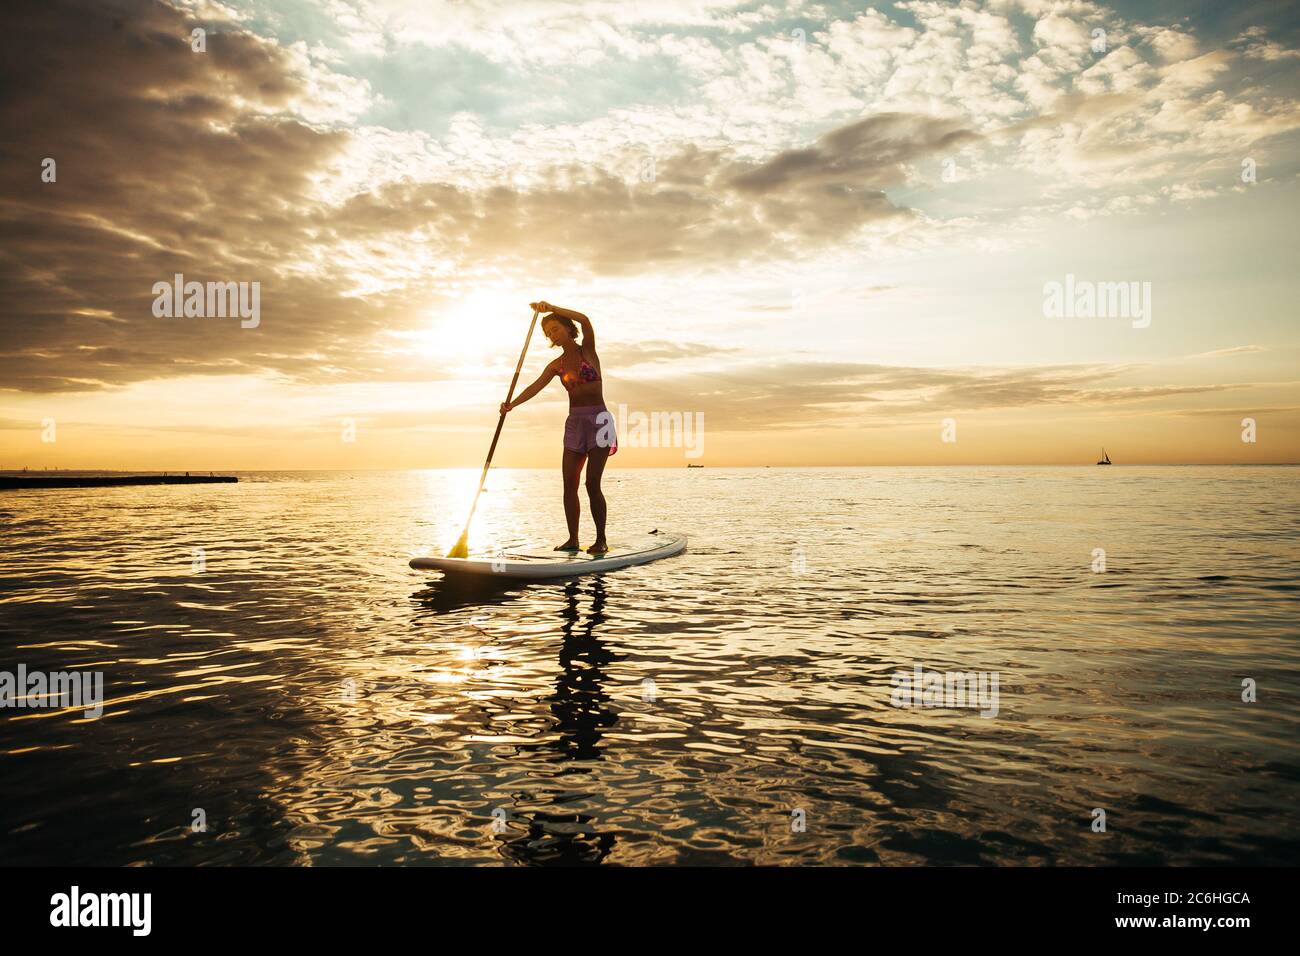 Woman On A Stand-Up Paddle Stock Photo